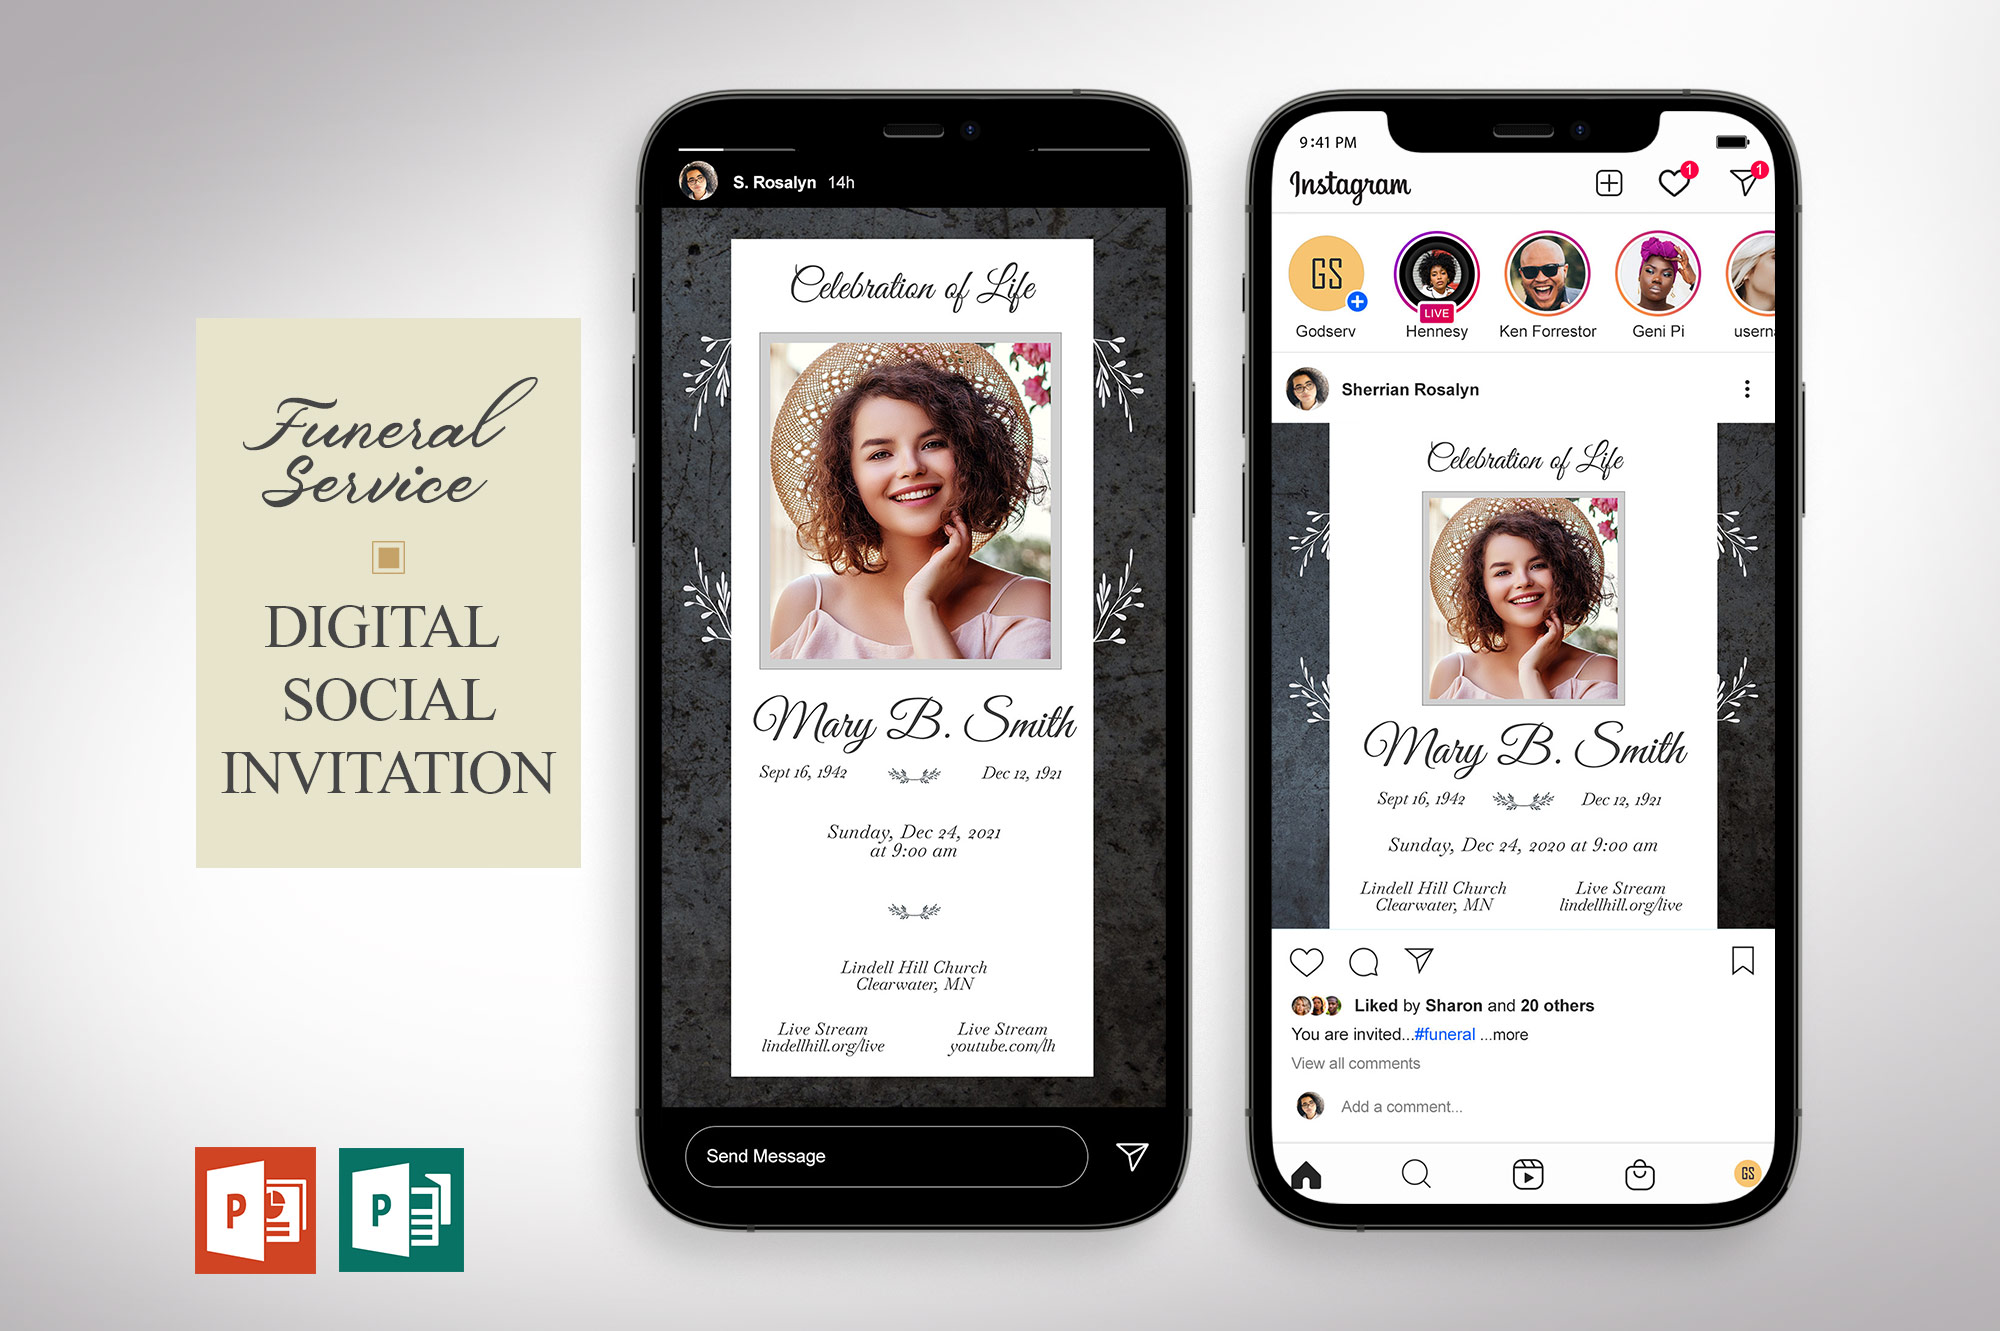 Graystone Funeral Digital Invitation PowerPoint Publisher Template | 2 Sizes | 1080x1080 Pixels (square) and 1080x1920 Pixels (rectangle)